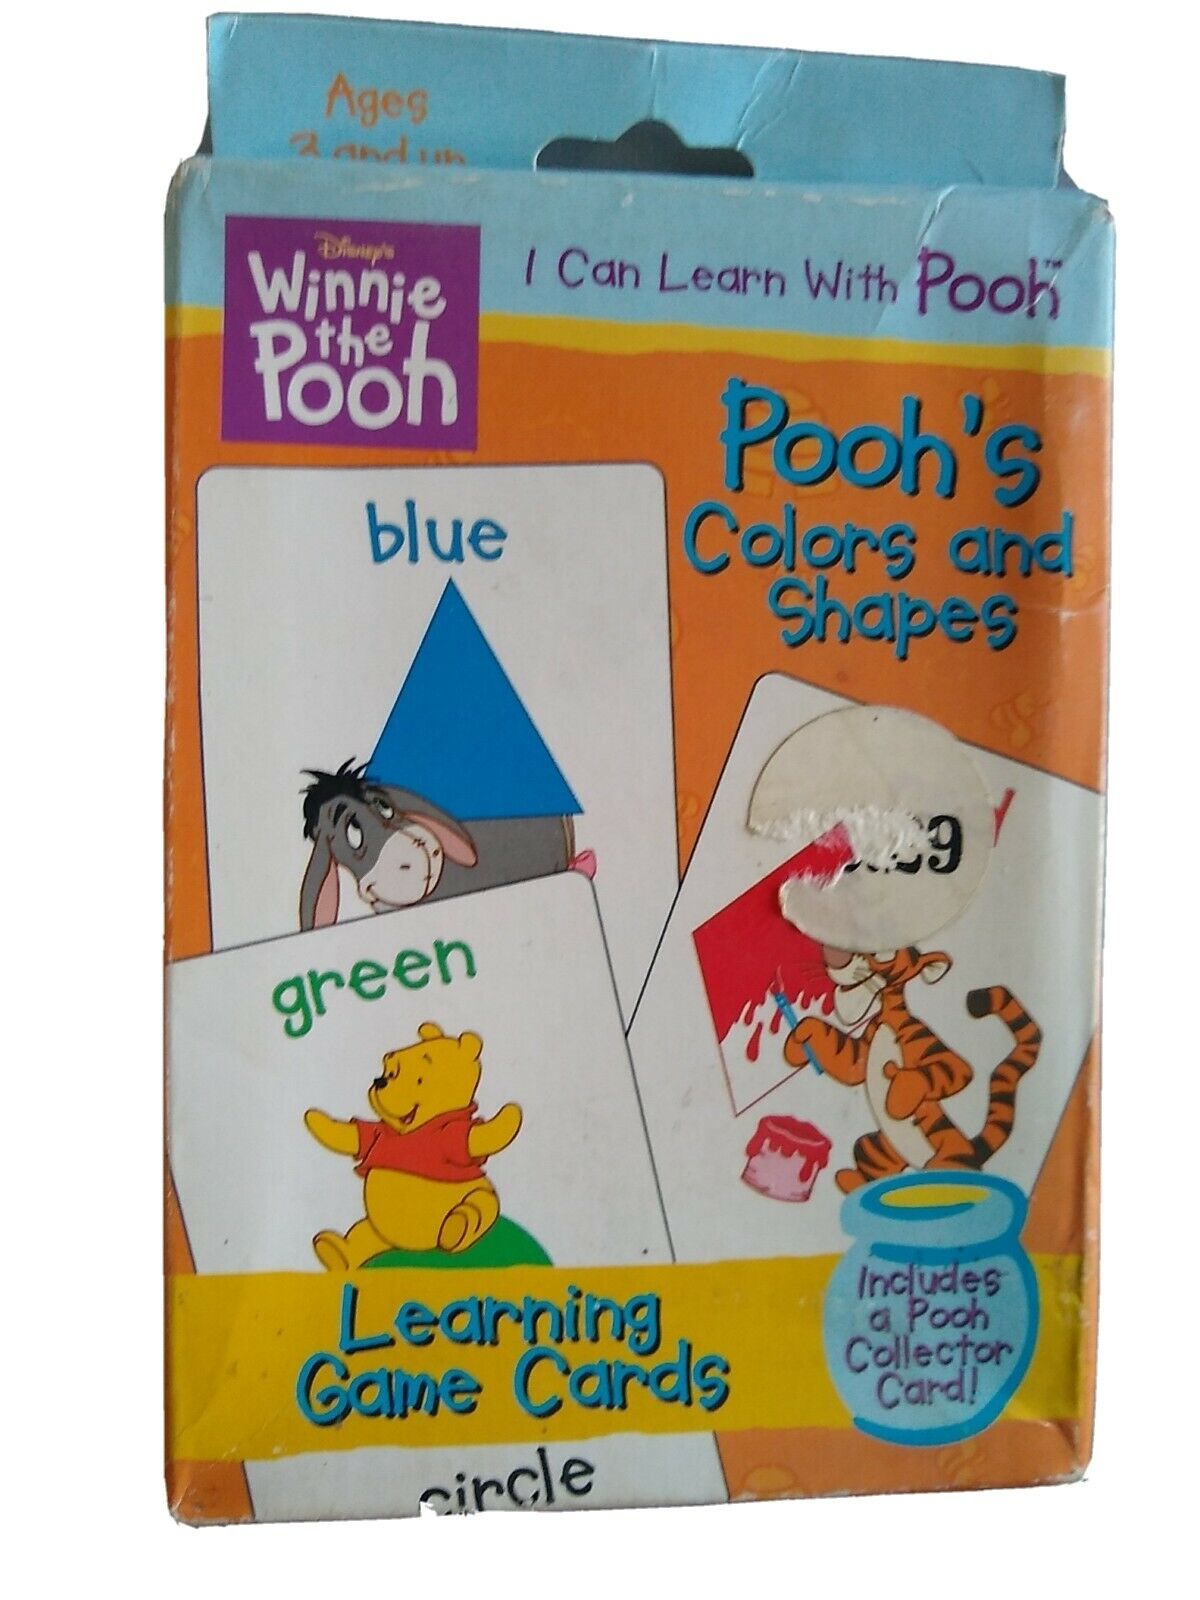 Disney Pooh's Colors And Shapes Flash Learning Cards New With Box Wear